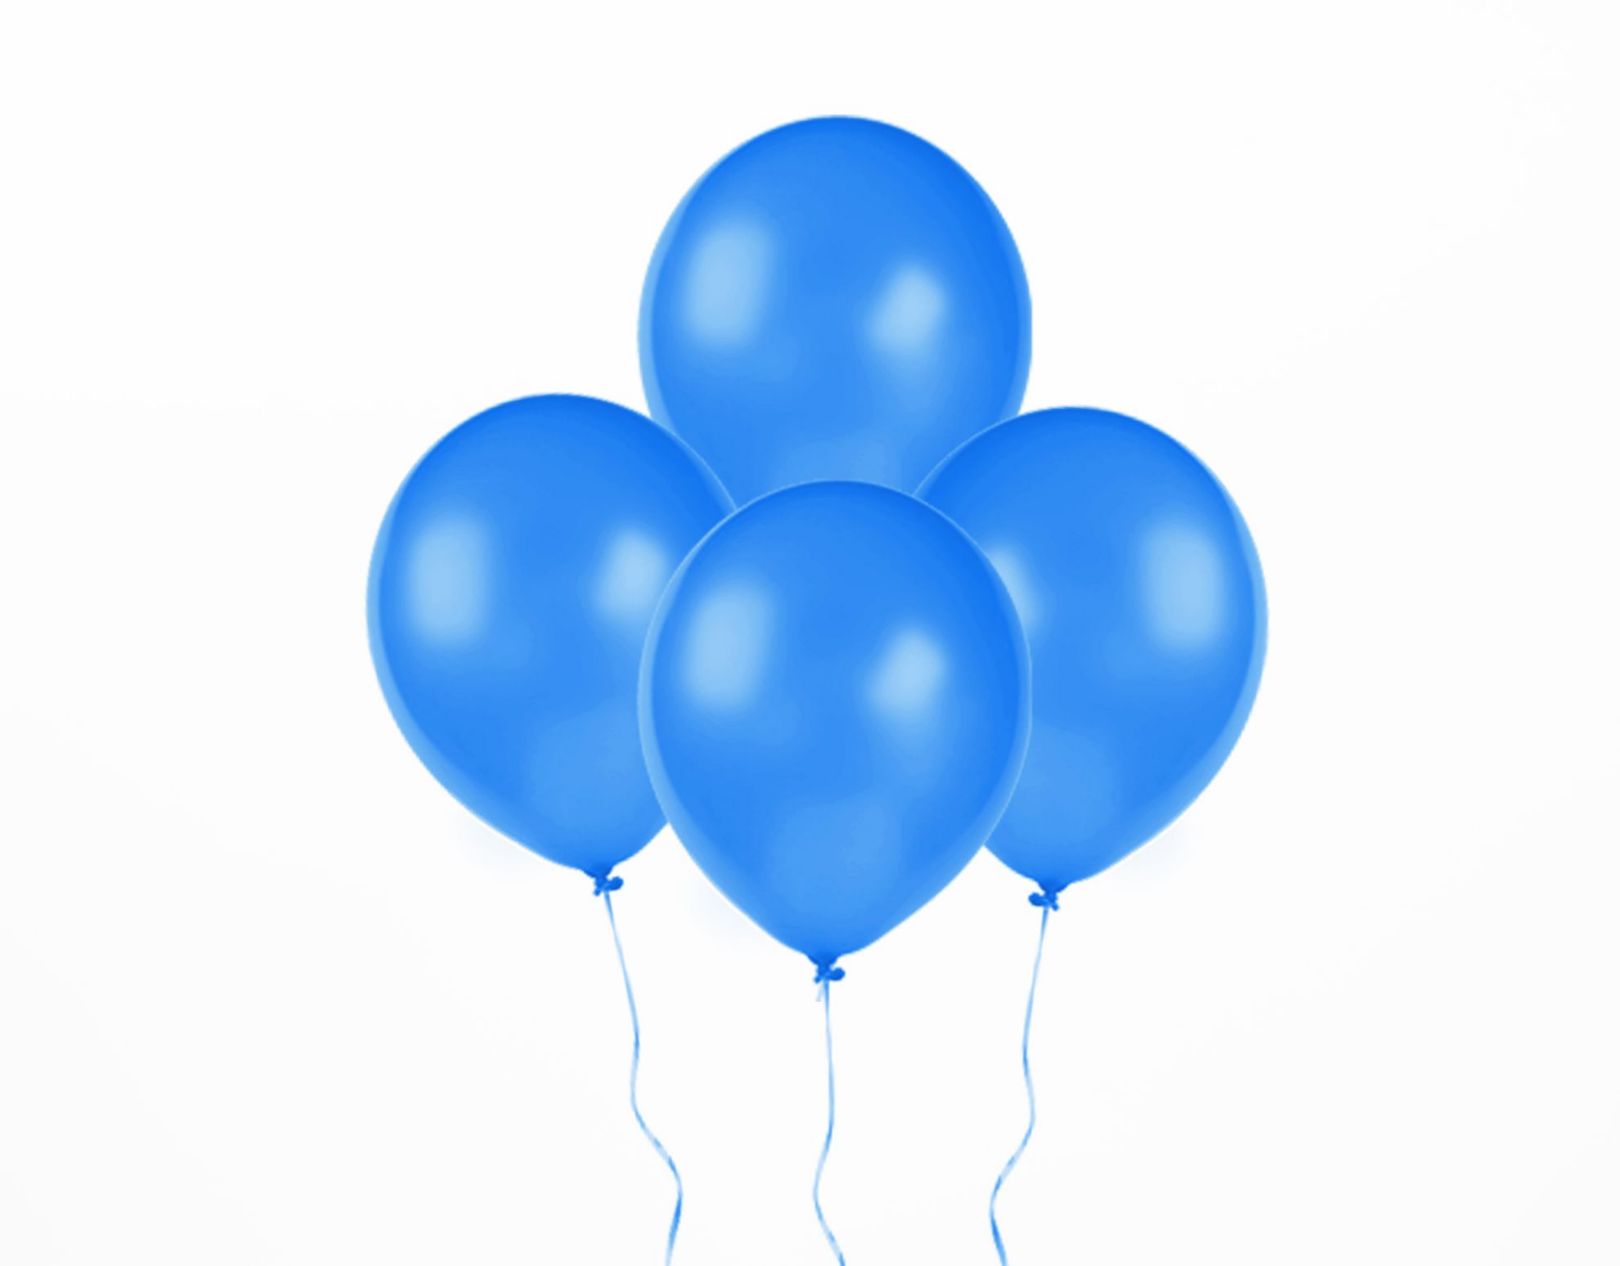 Picture of 4 Dark Blue Balloons